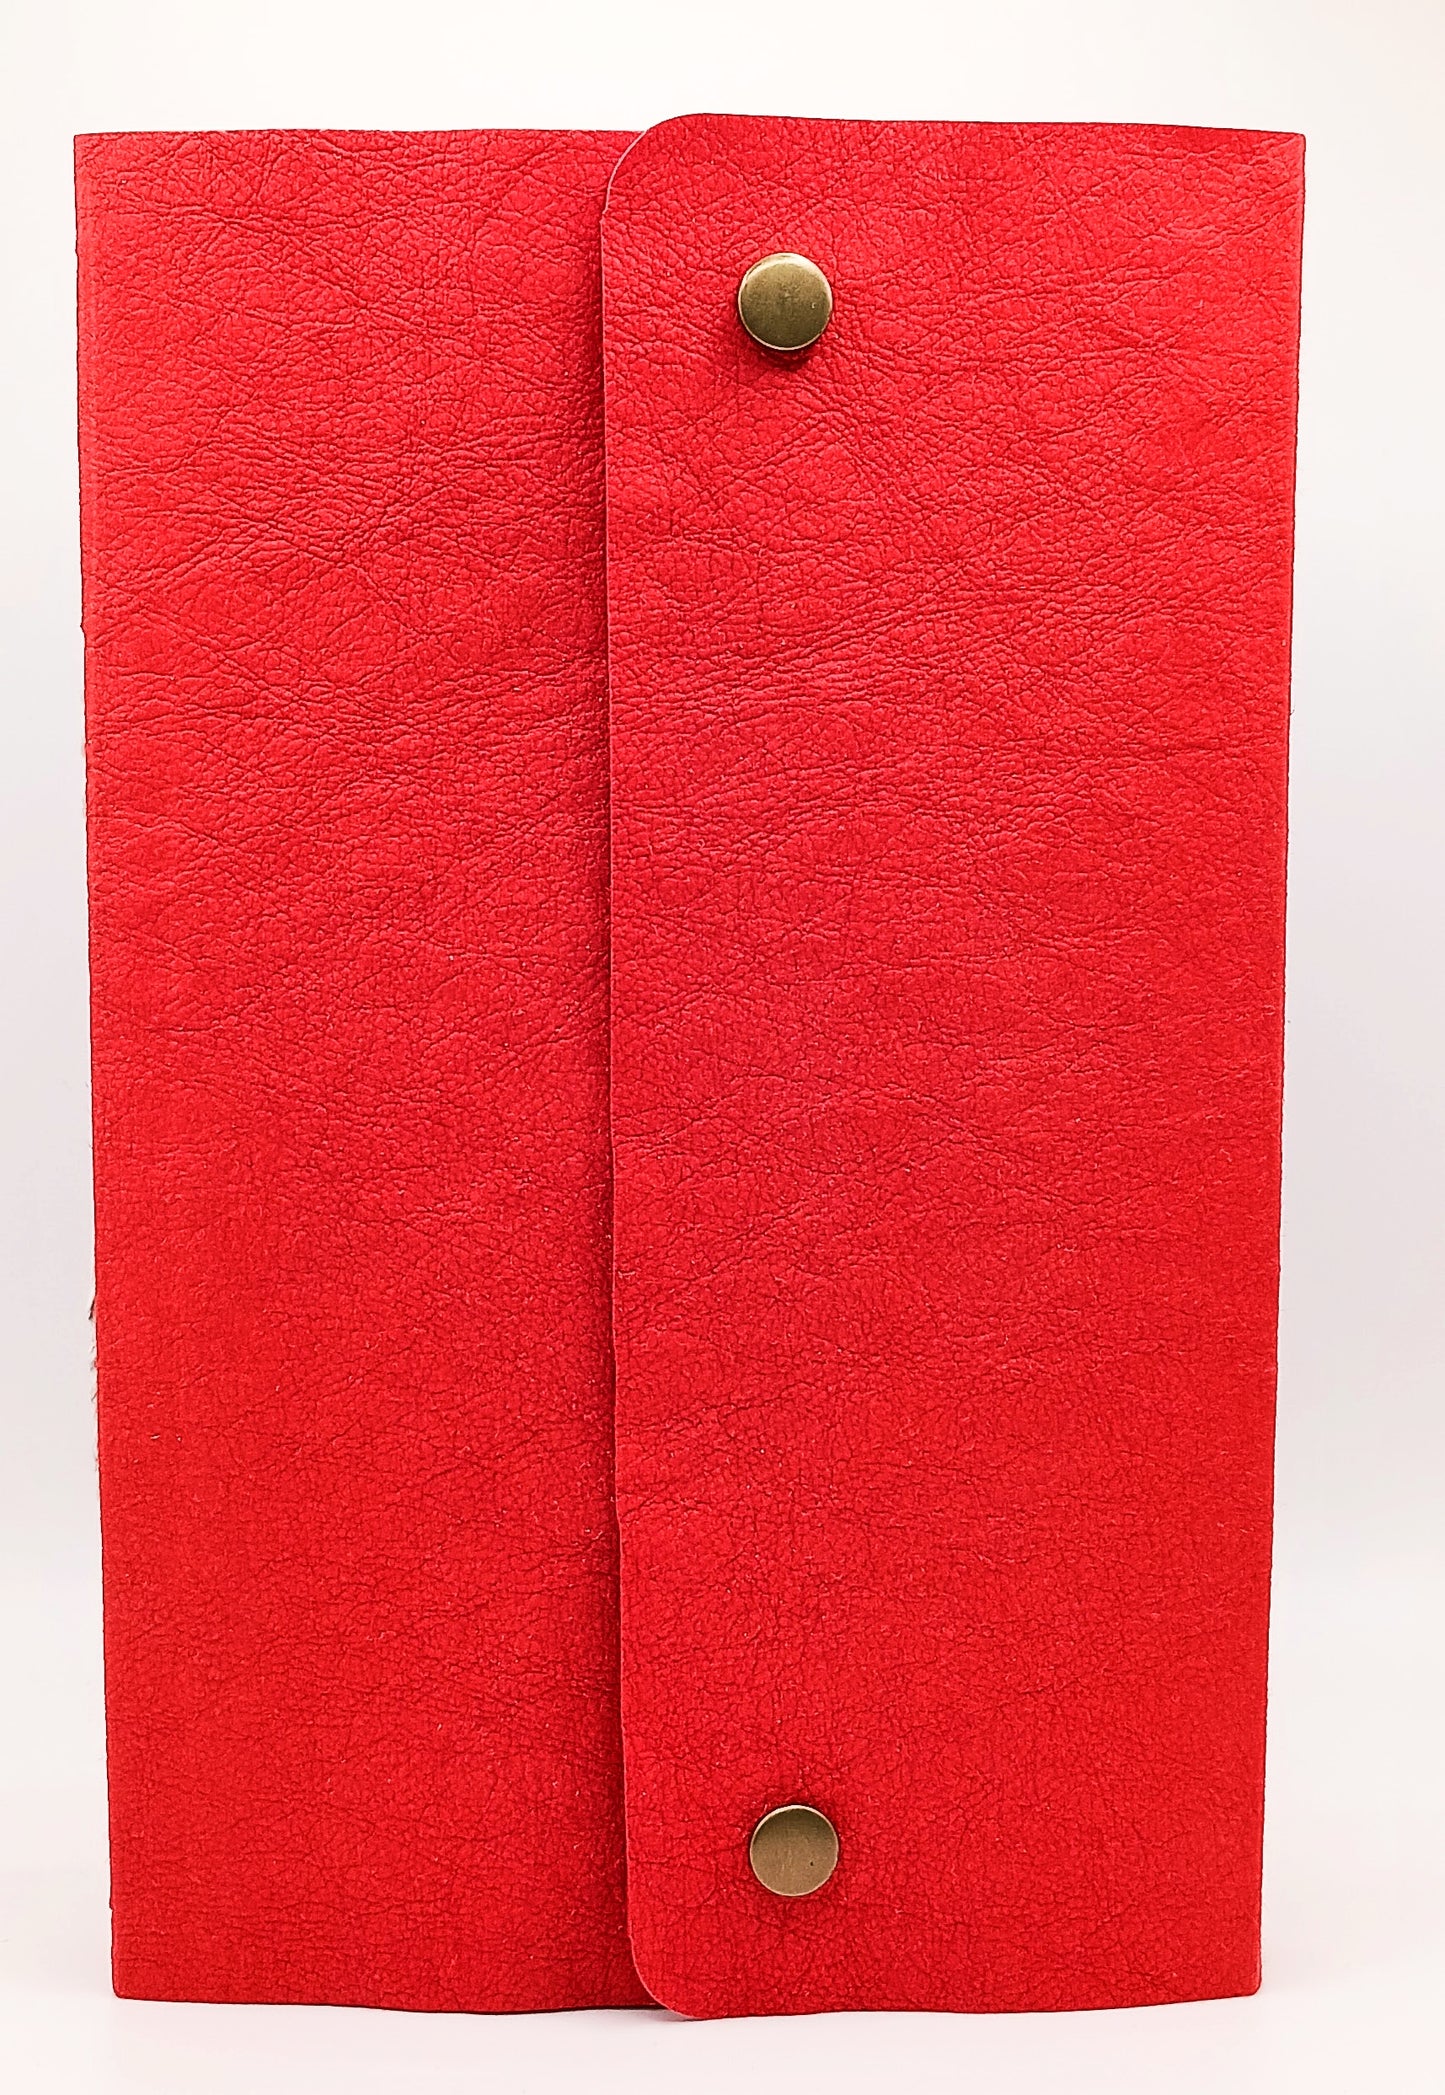 Jewel-Tone Journals with Parchment